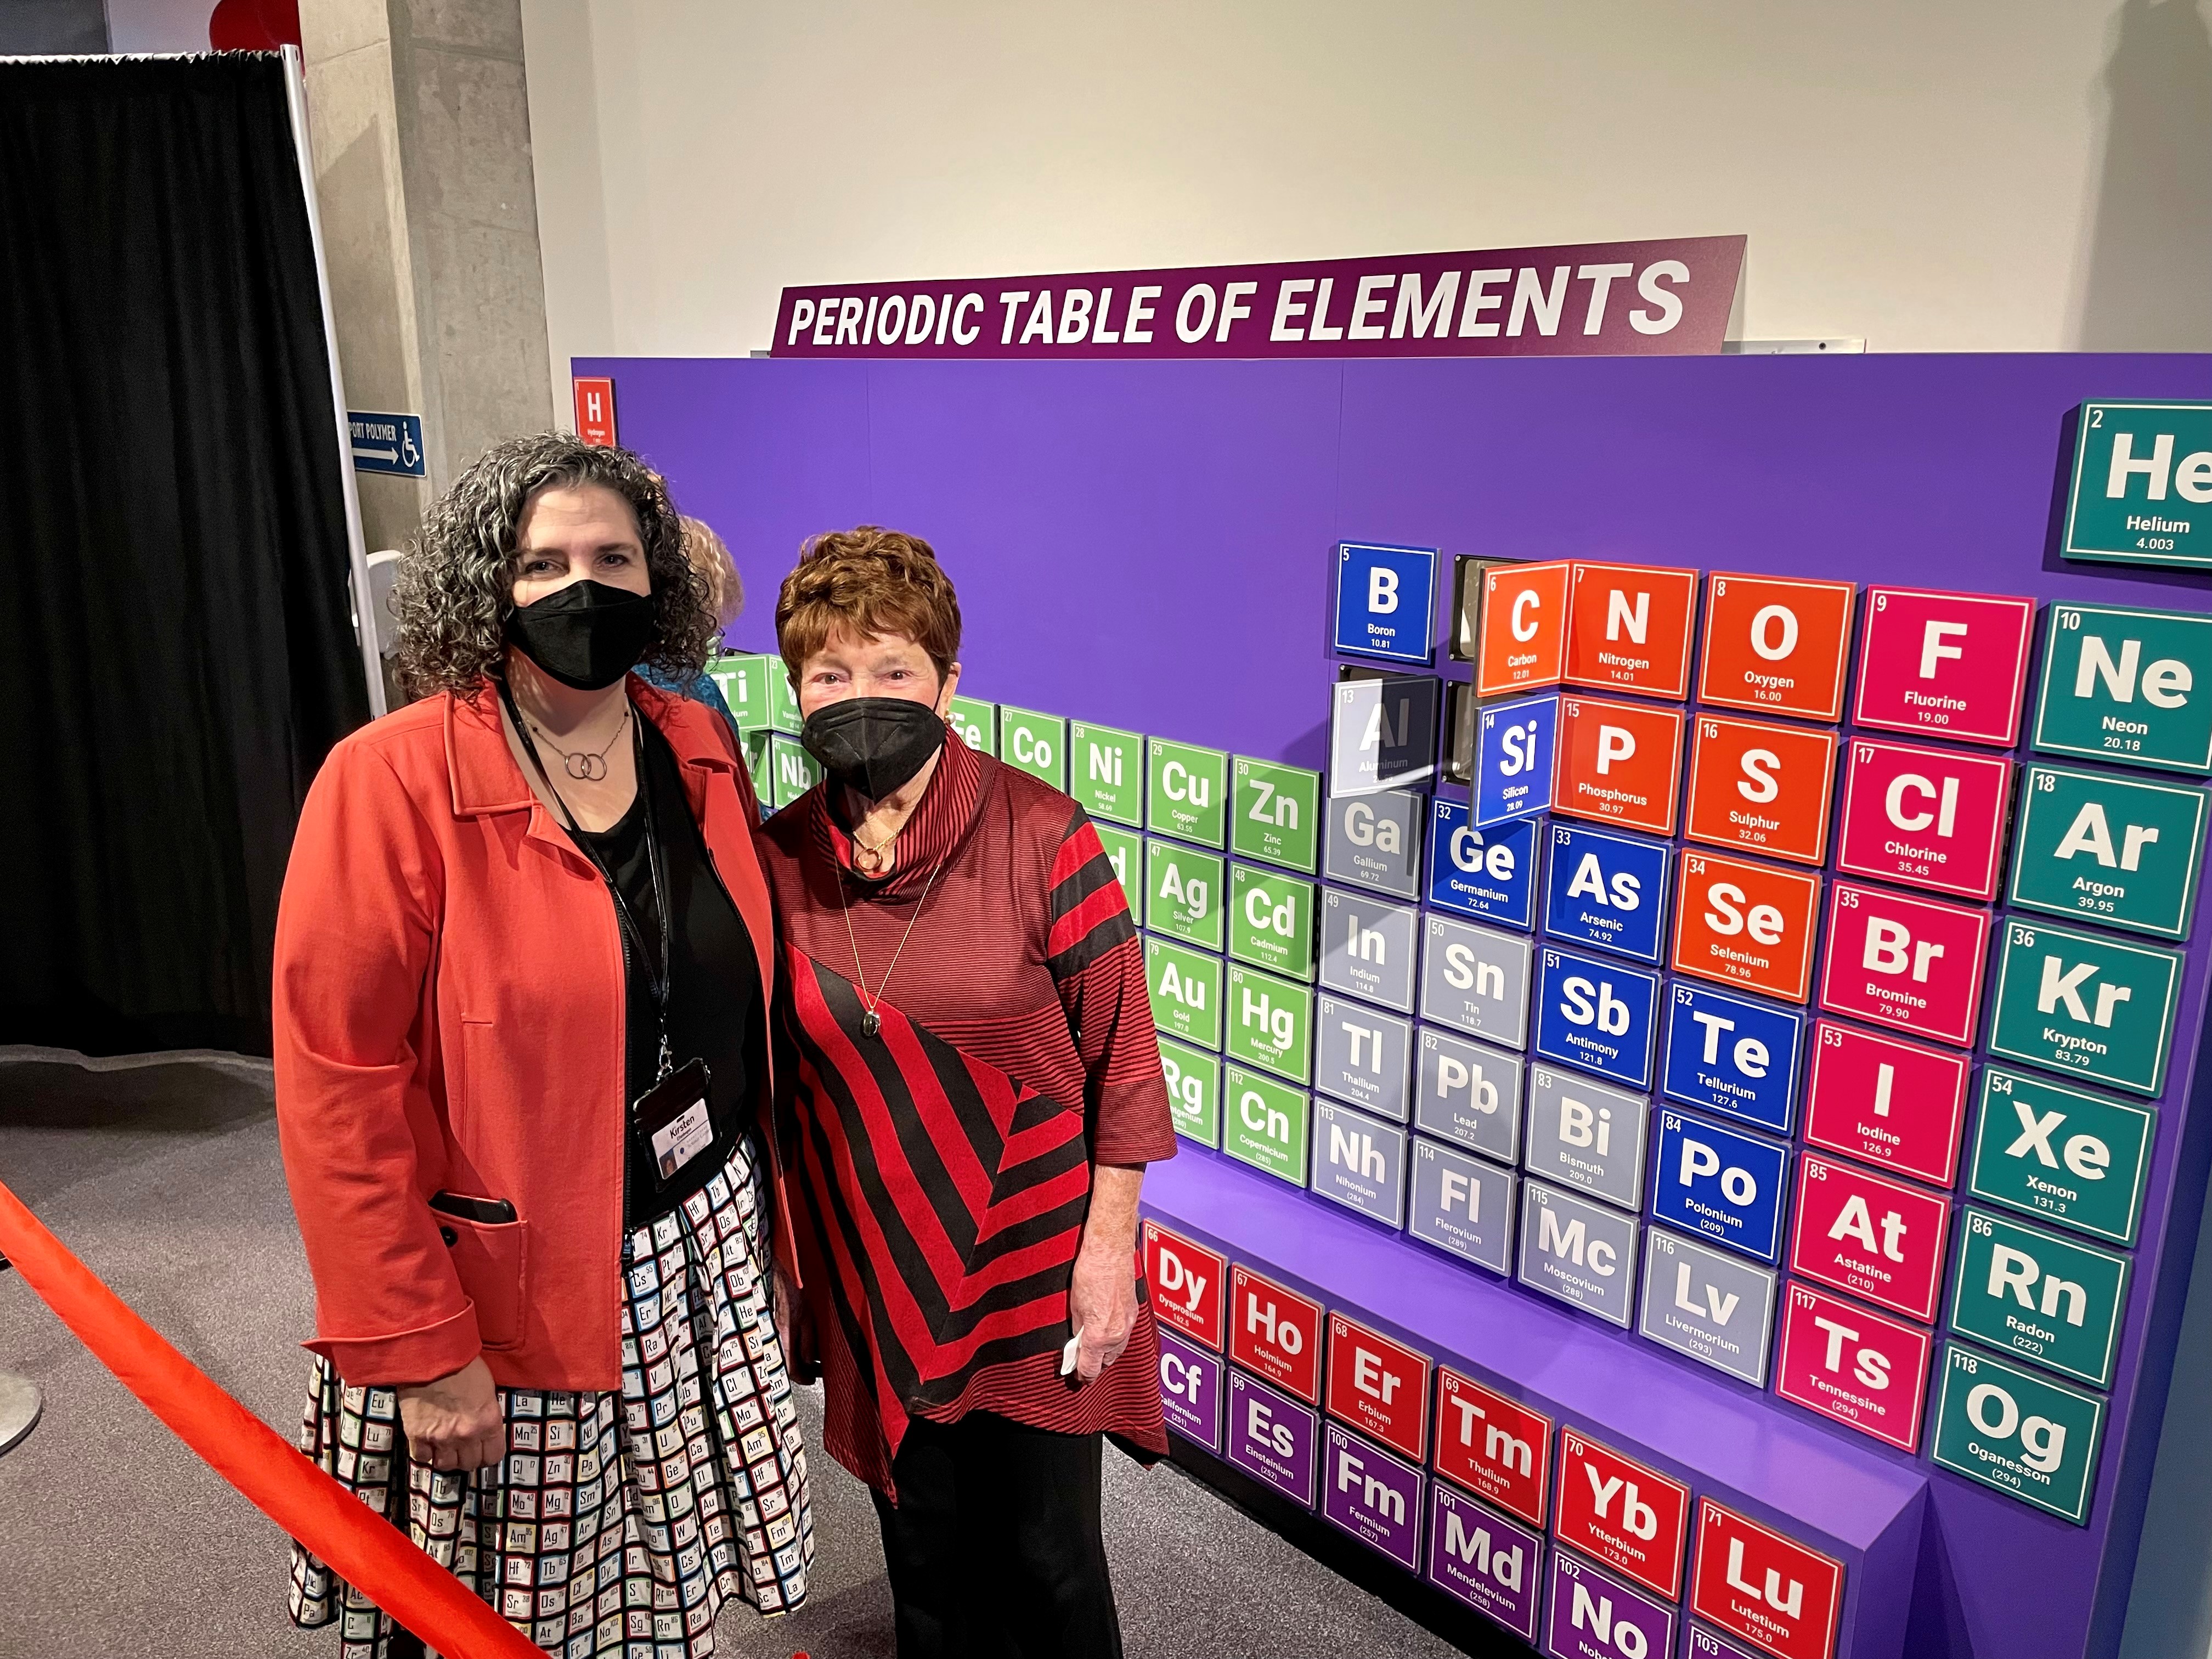 The Science Center’s new periodic table exhibit honors local husband and wife scientists